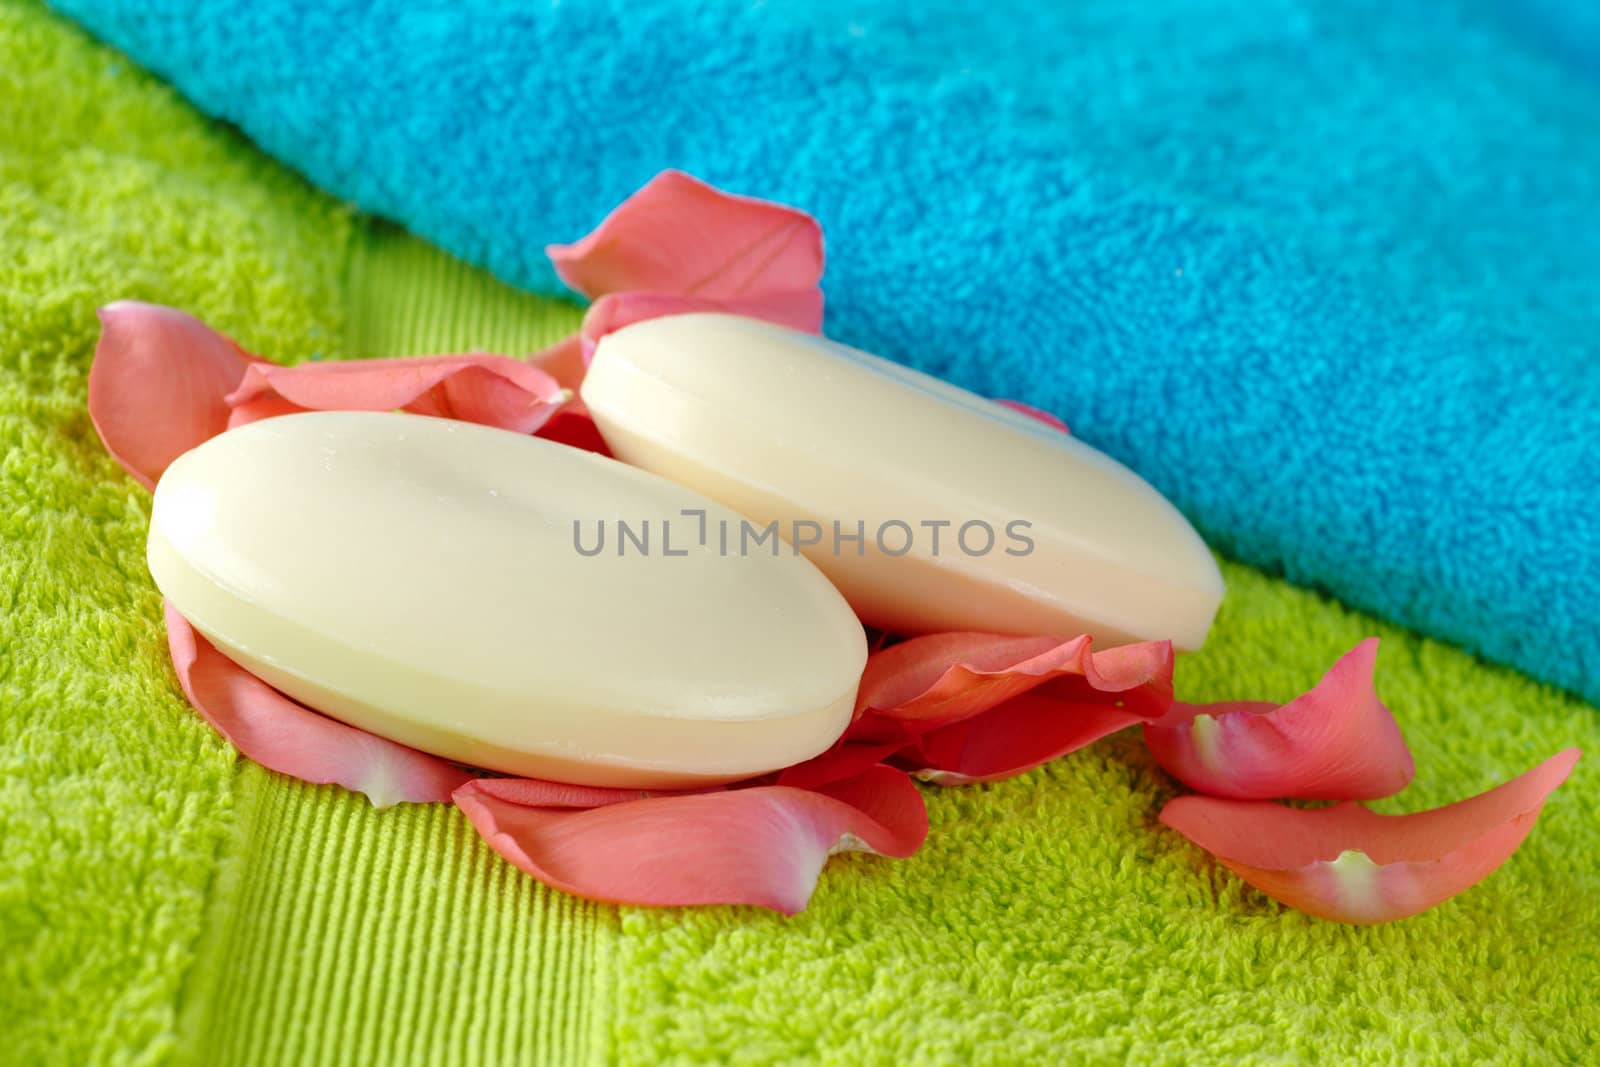 Blue and green bath towels with white soaps between pink rose petals (Selective Focus, Focus on the front soap)